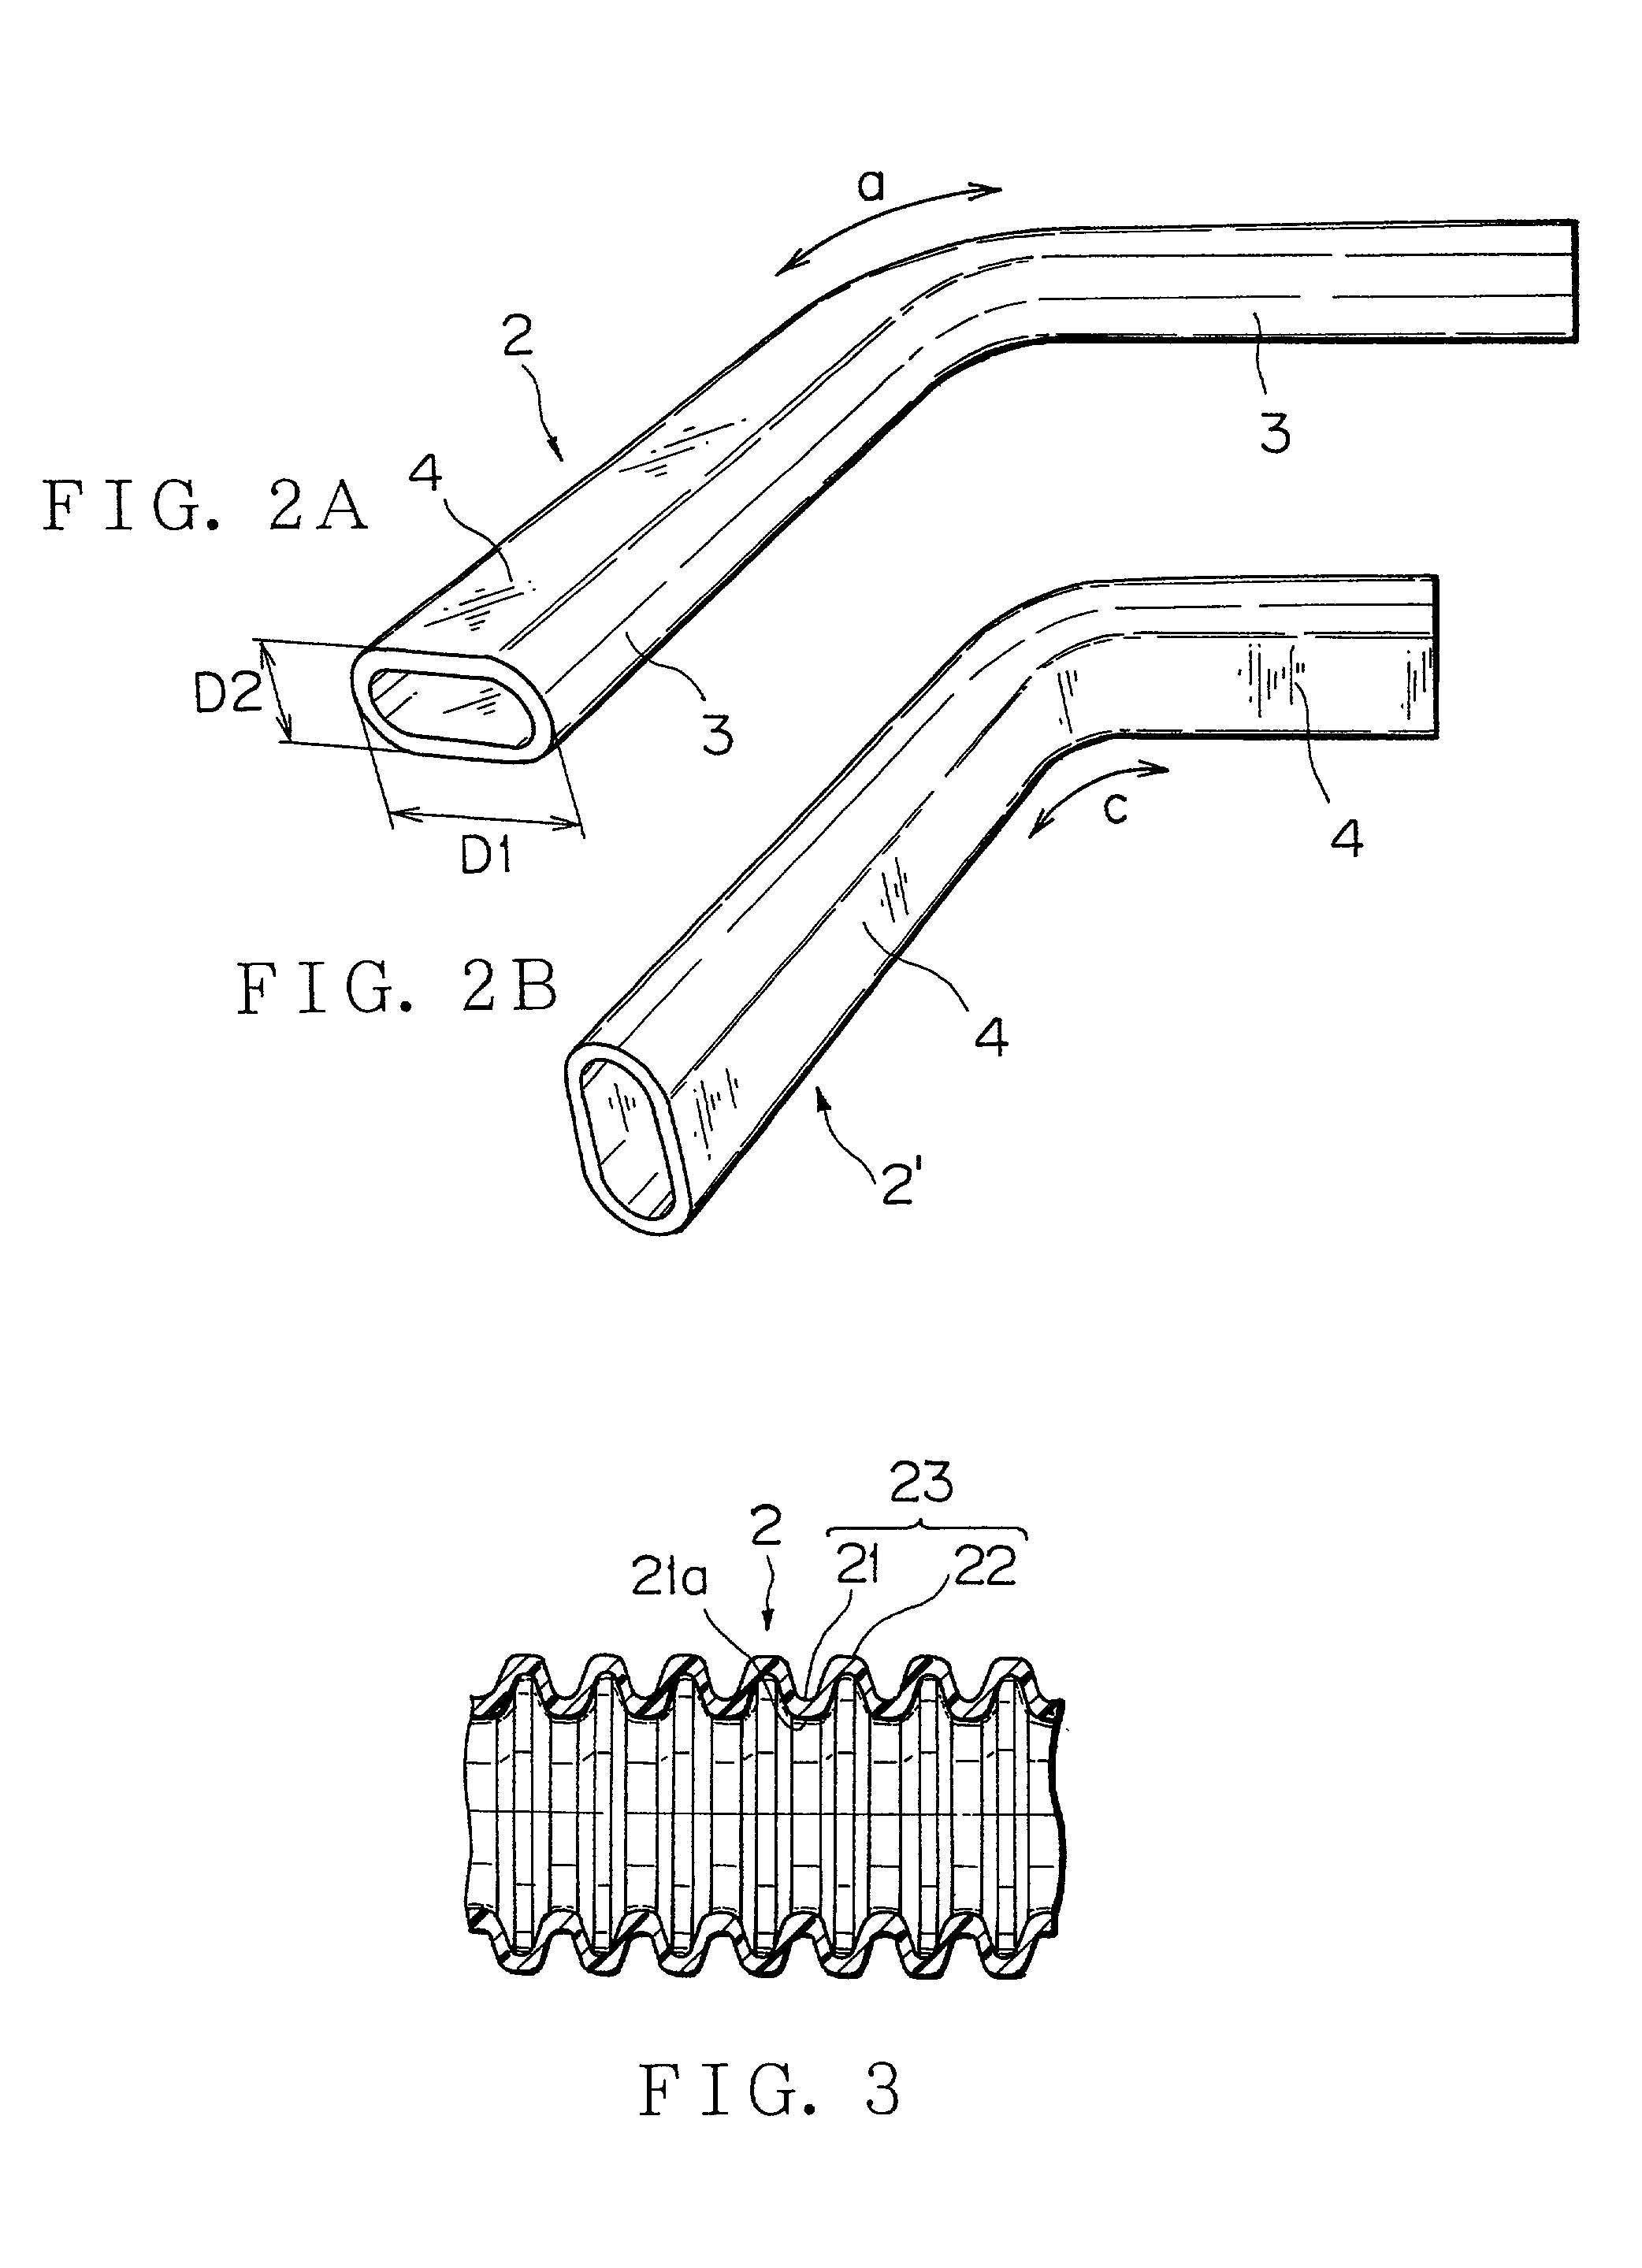 Structure of installing wire harness for sliding door